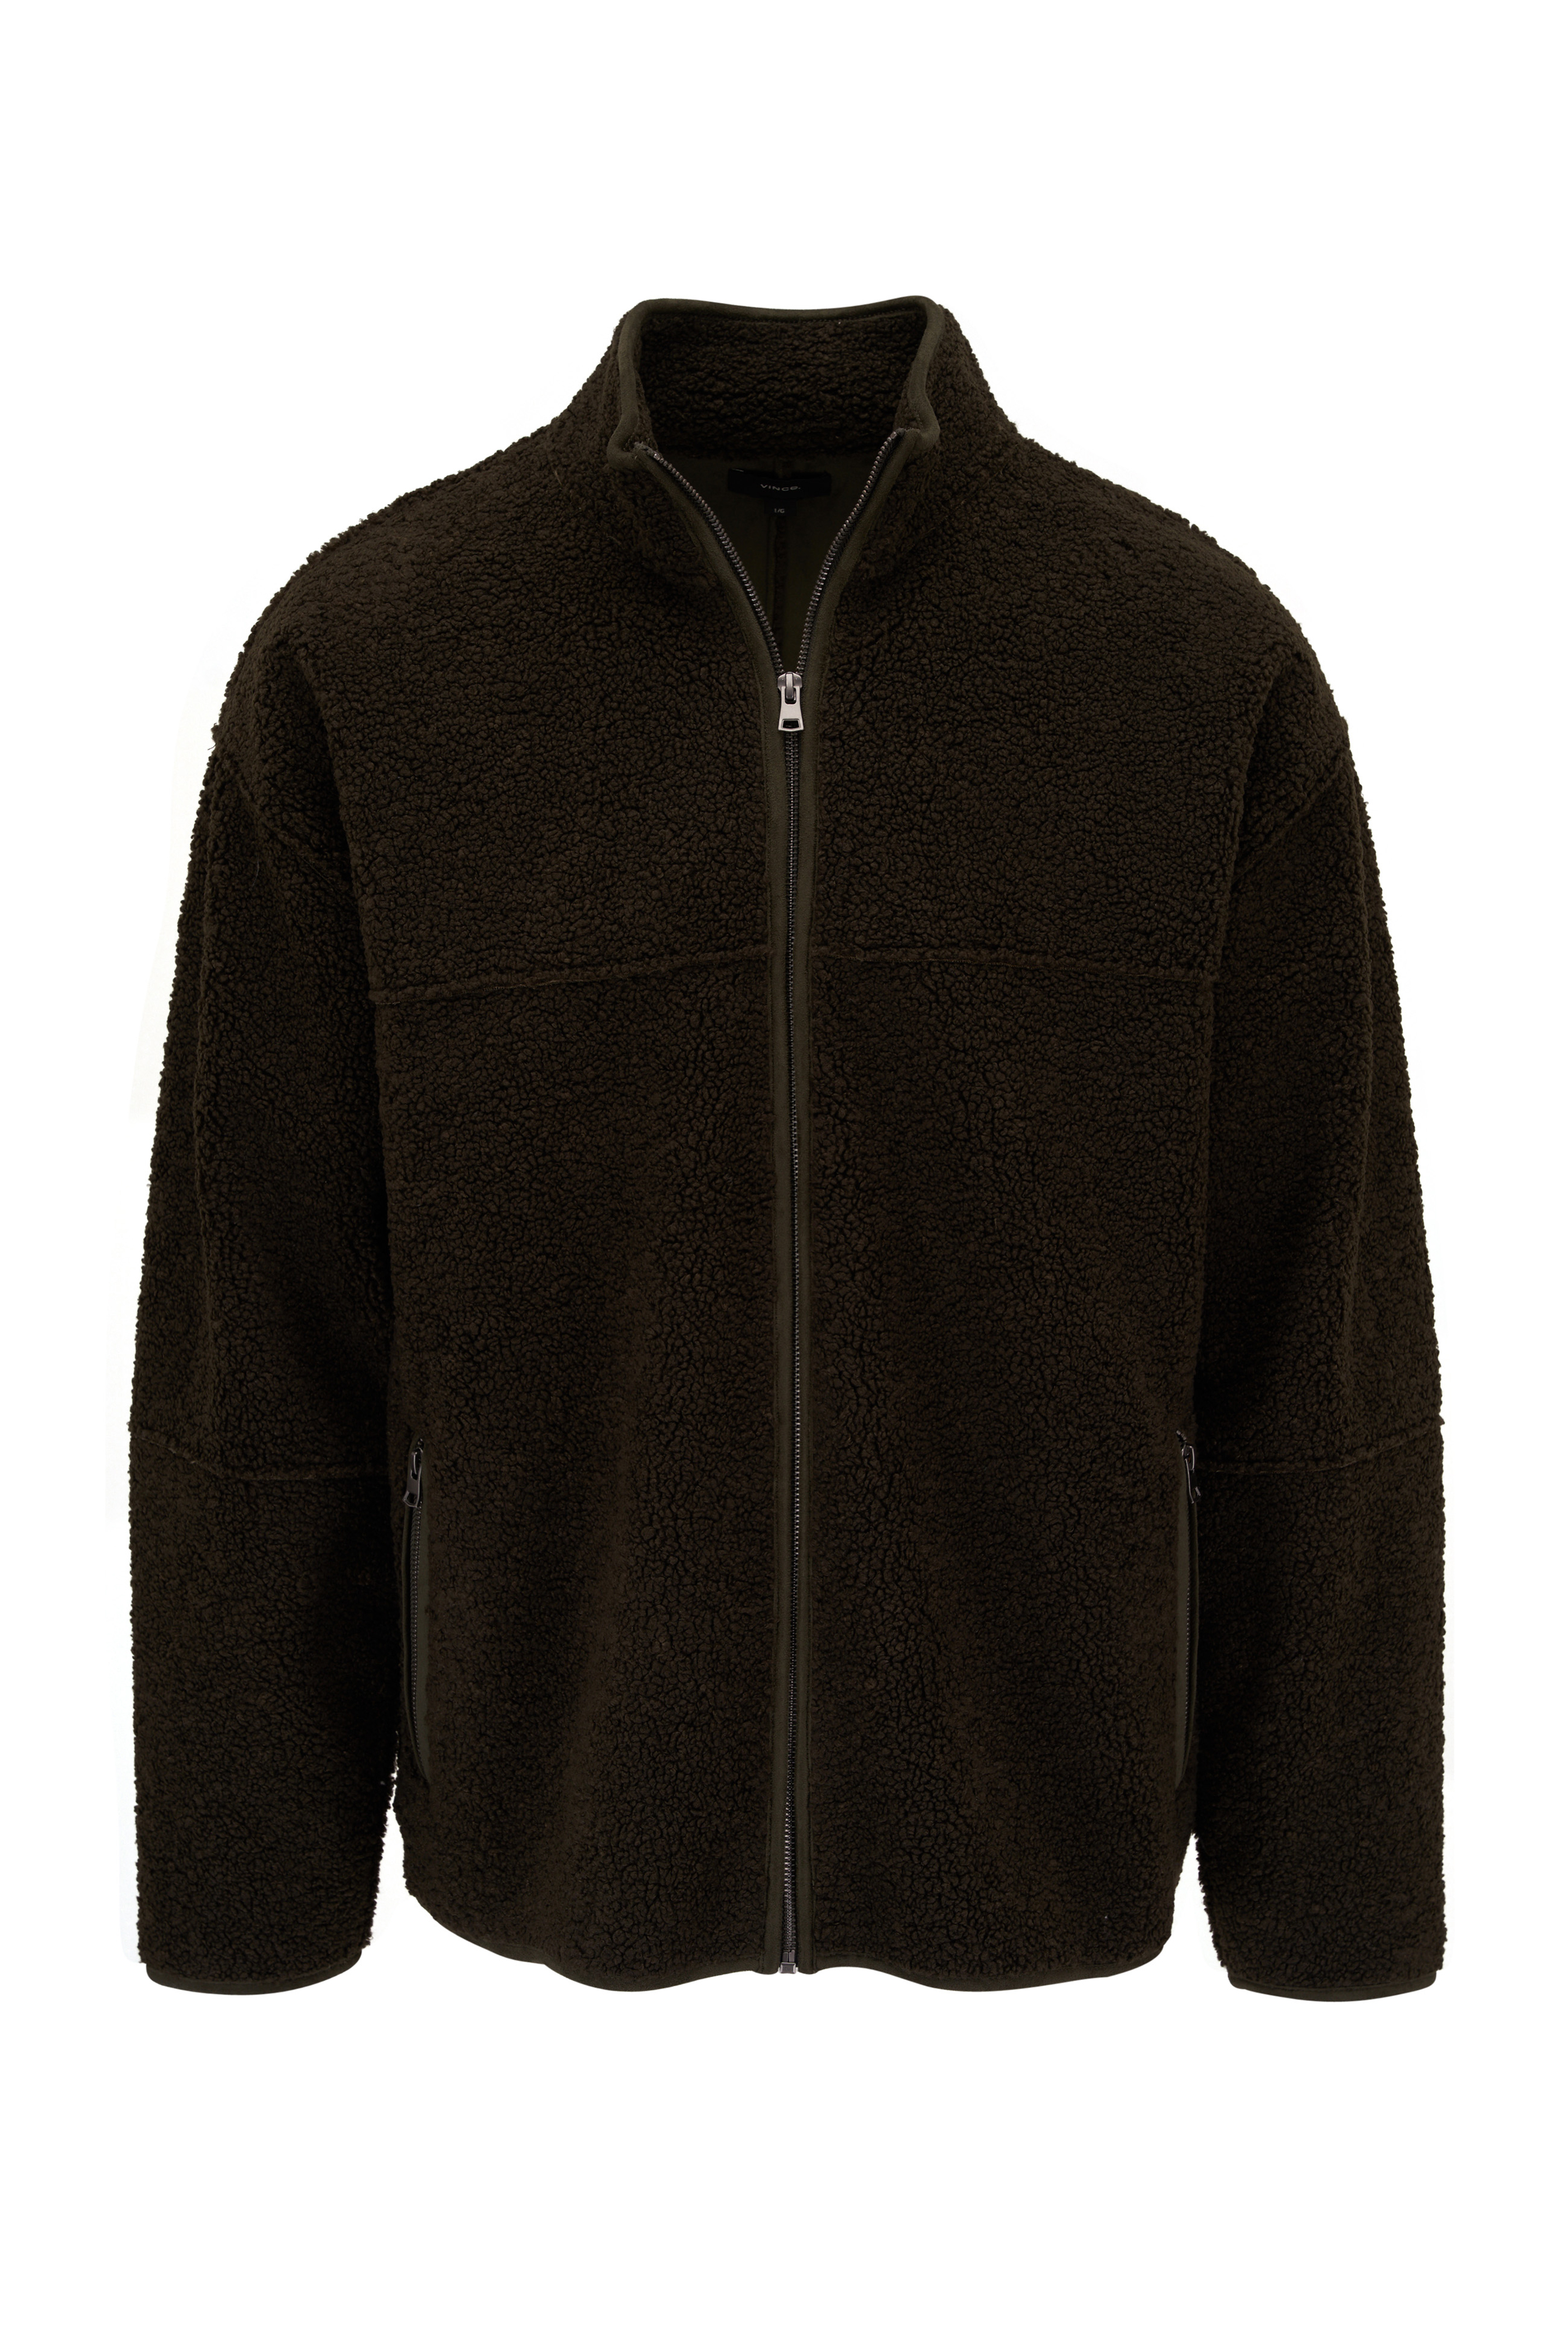 Parajumpers Short Jackets - Ronin Black - Green Gables Male S